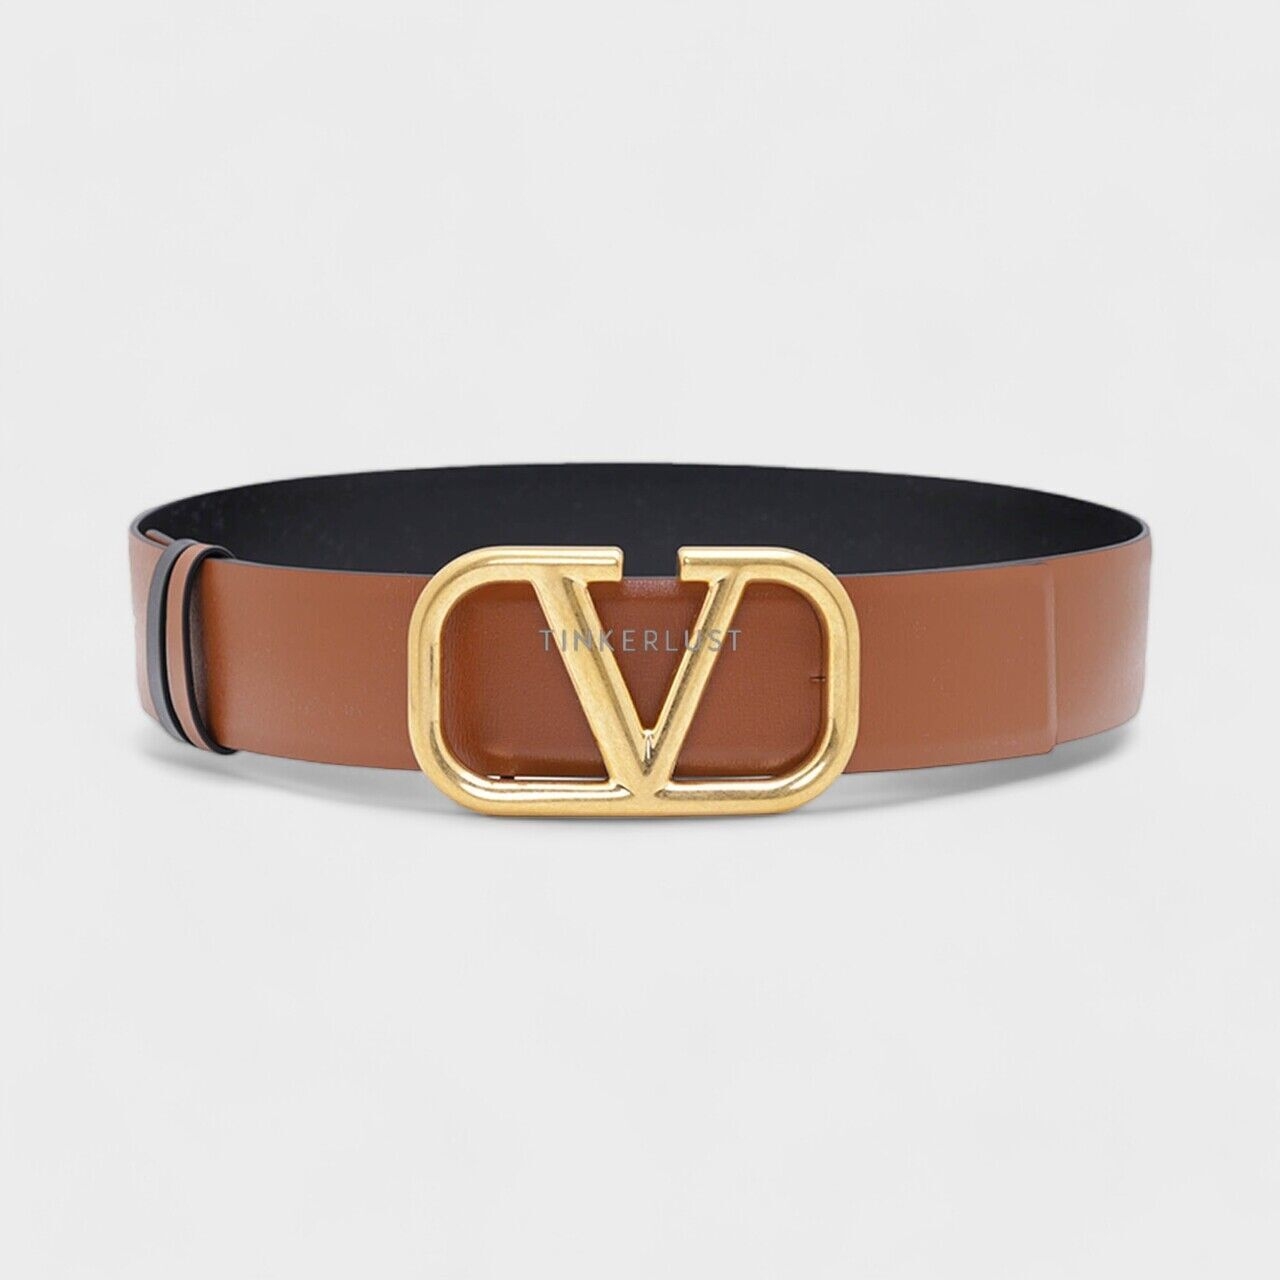 Valentino Reversible Belt 4cm in Black/Brown Leather with VLogo Buckle